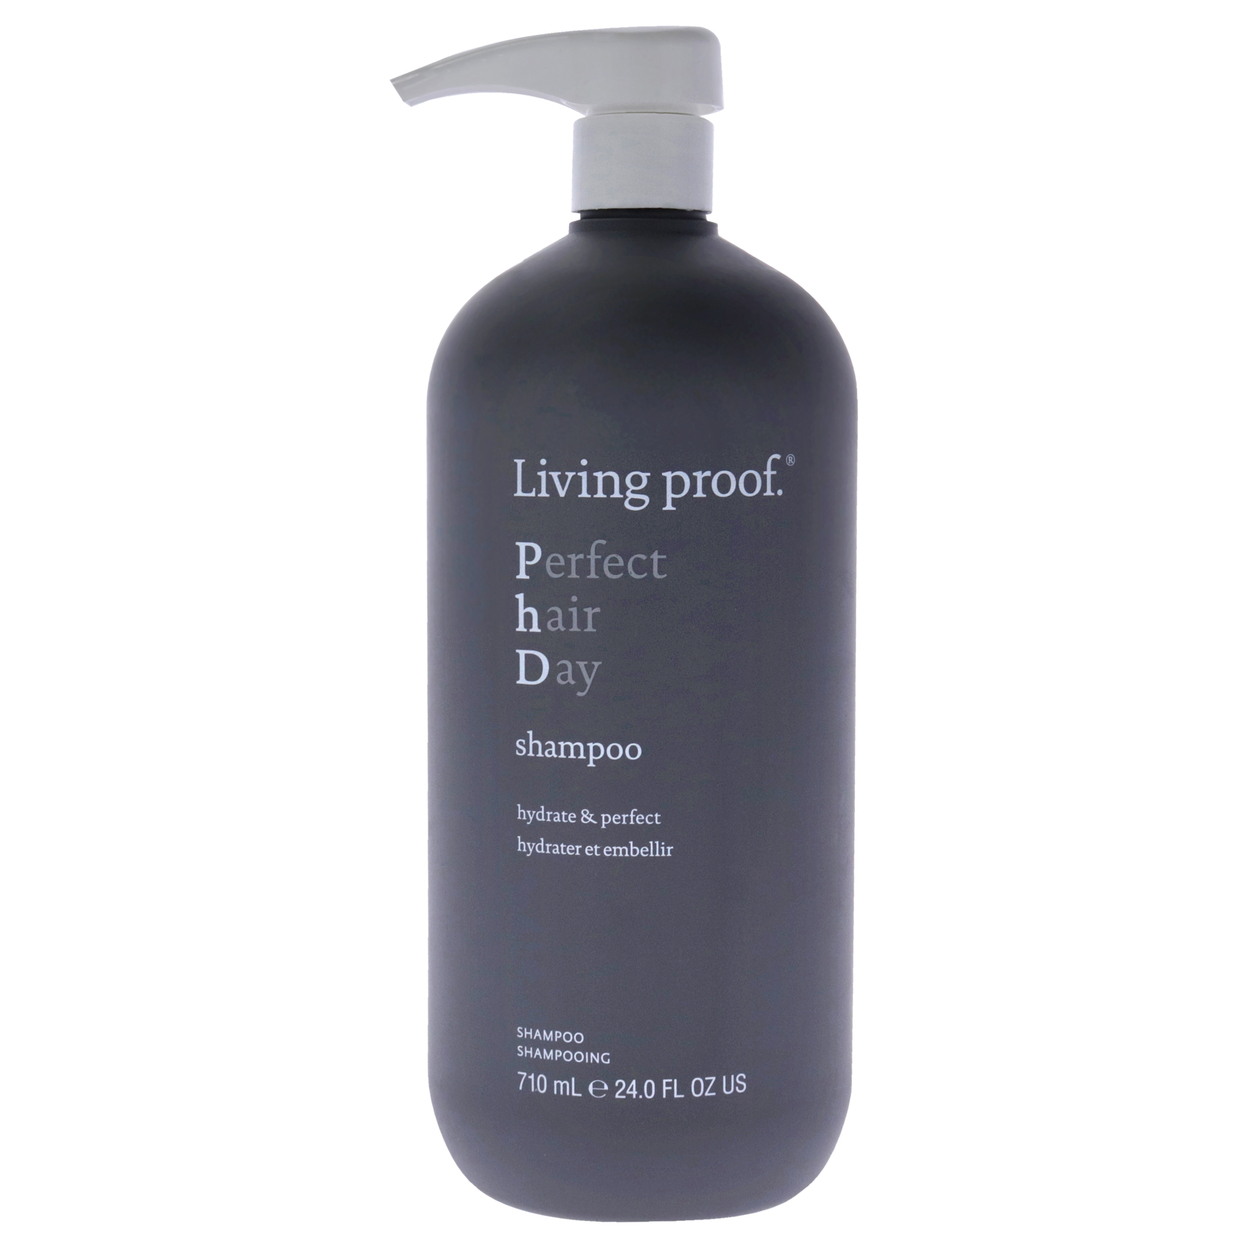 Living Proof Unisex HAIRCARE Perfect Hair Day Shampoo 24 Oz